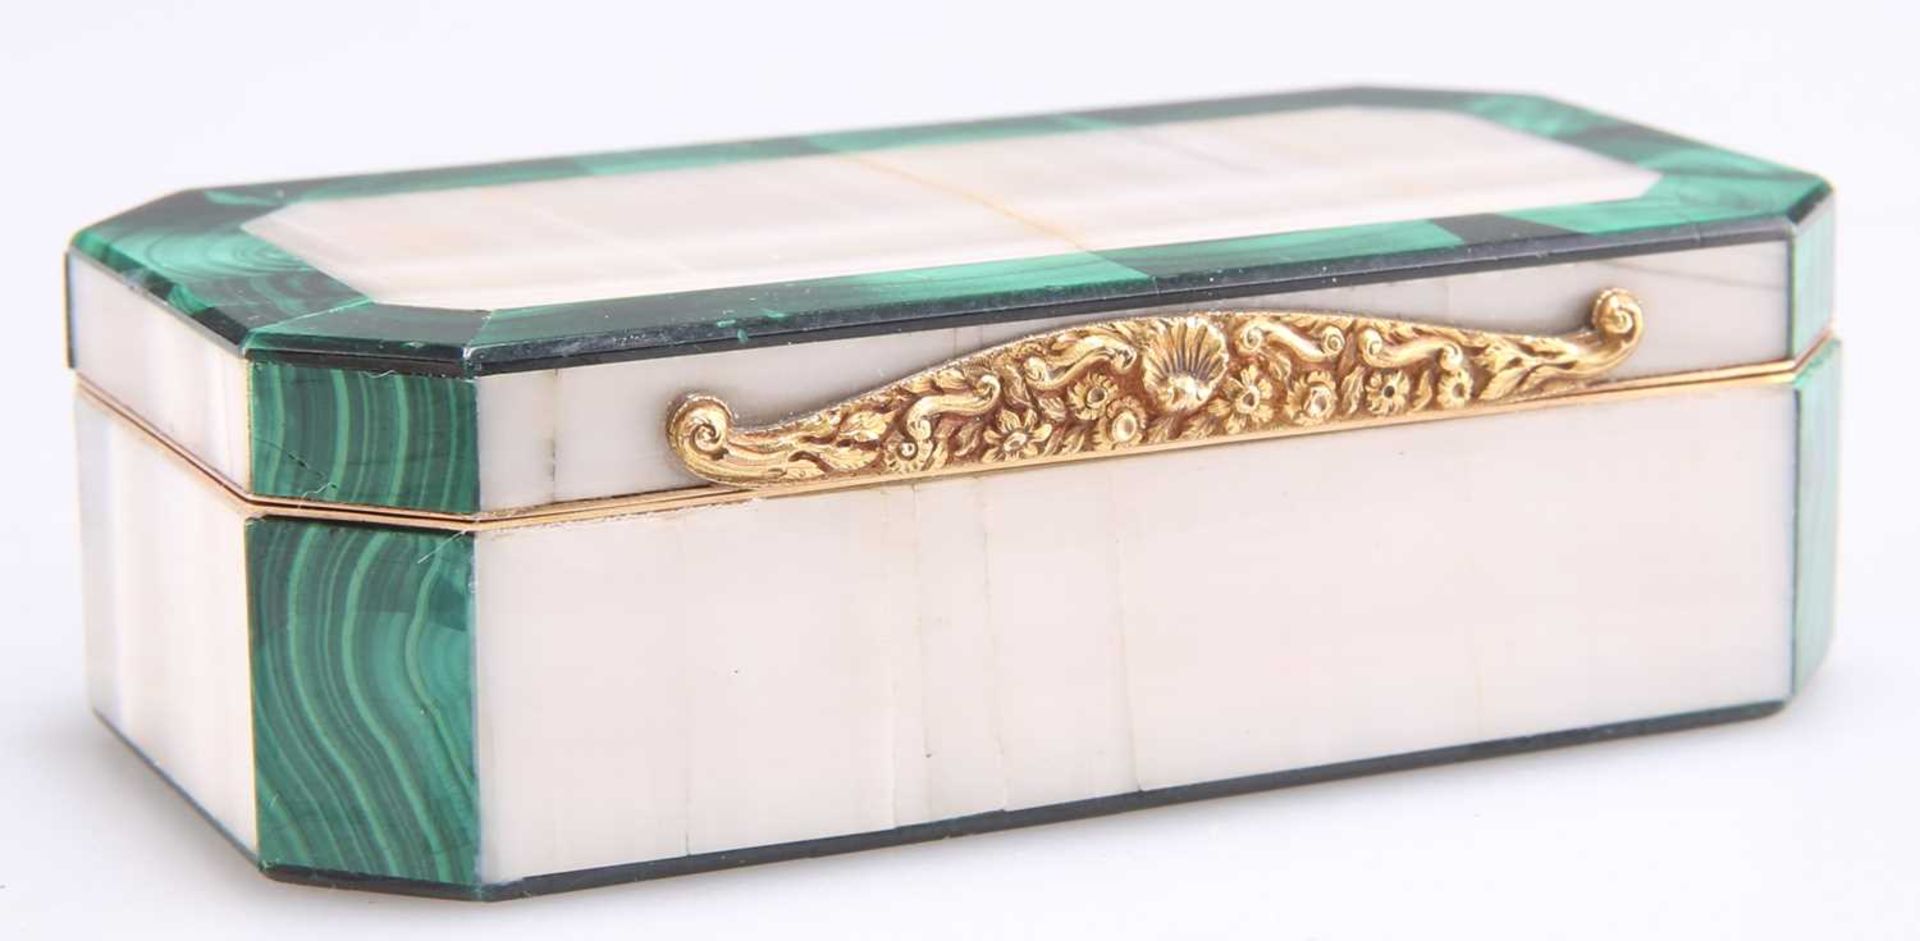 A 19TH CENTURY MALACHITE, MOTHER-OF-PEARL AND GOLD SNUFF BOX